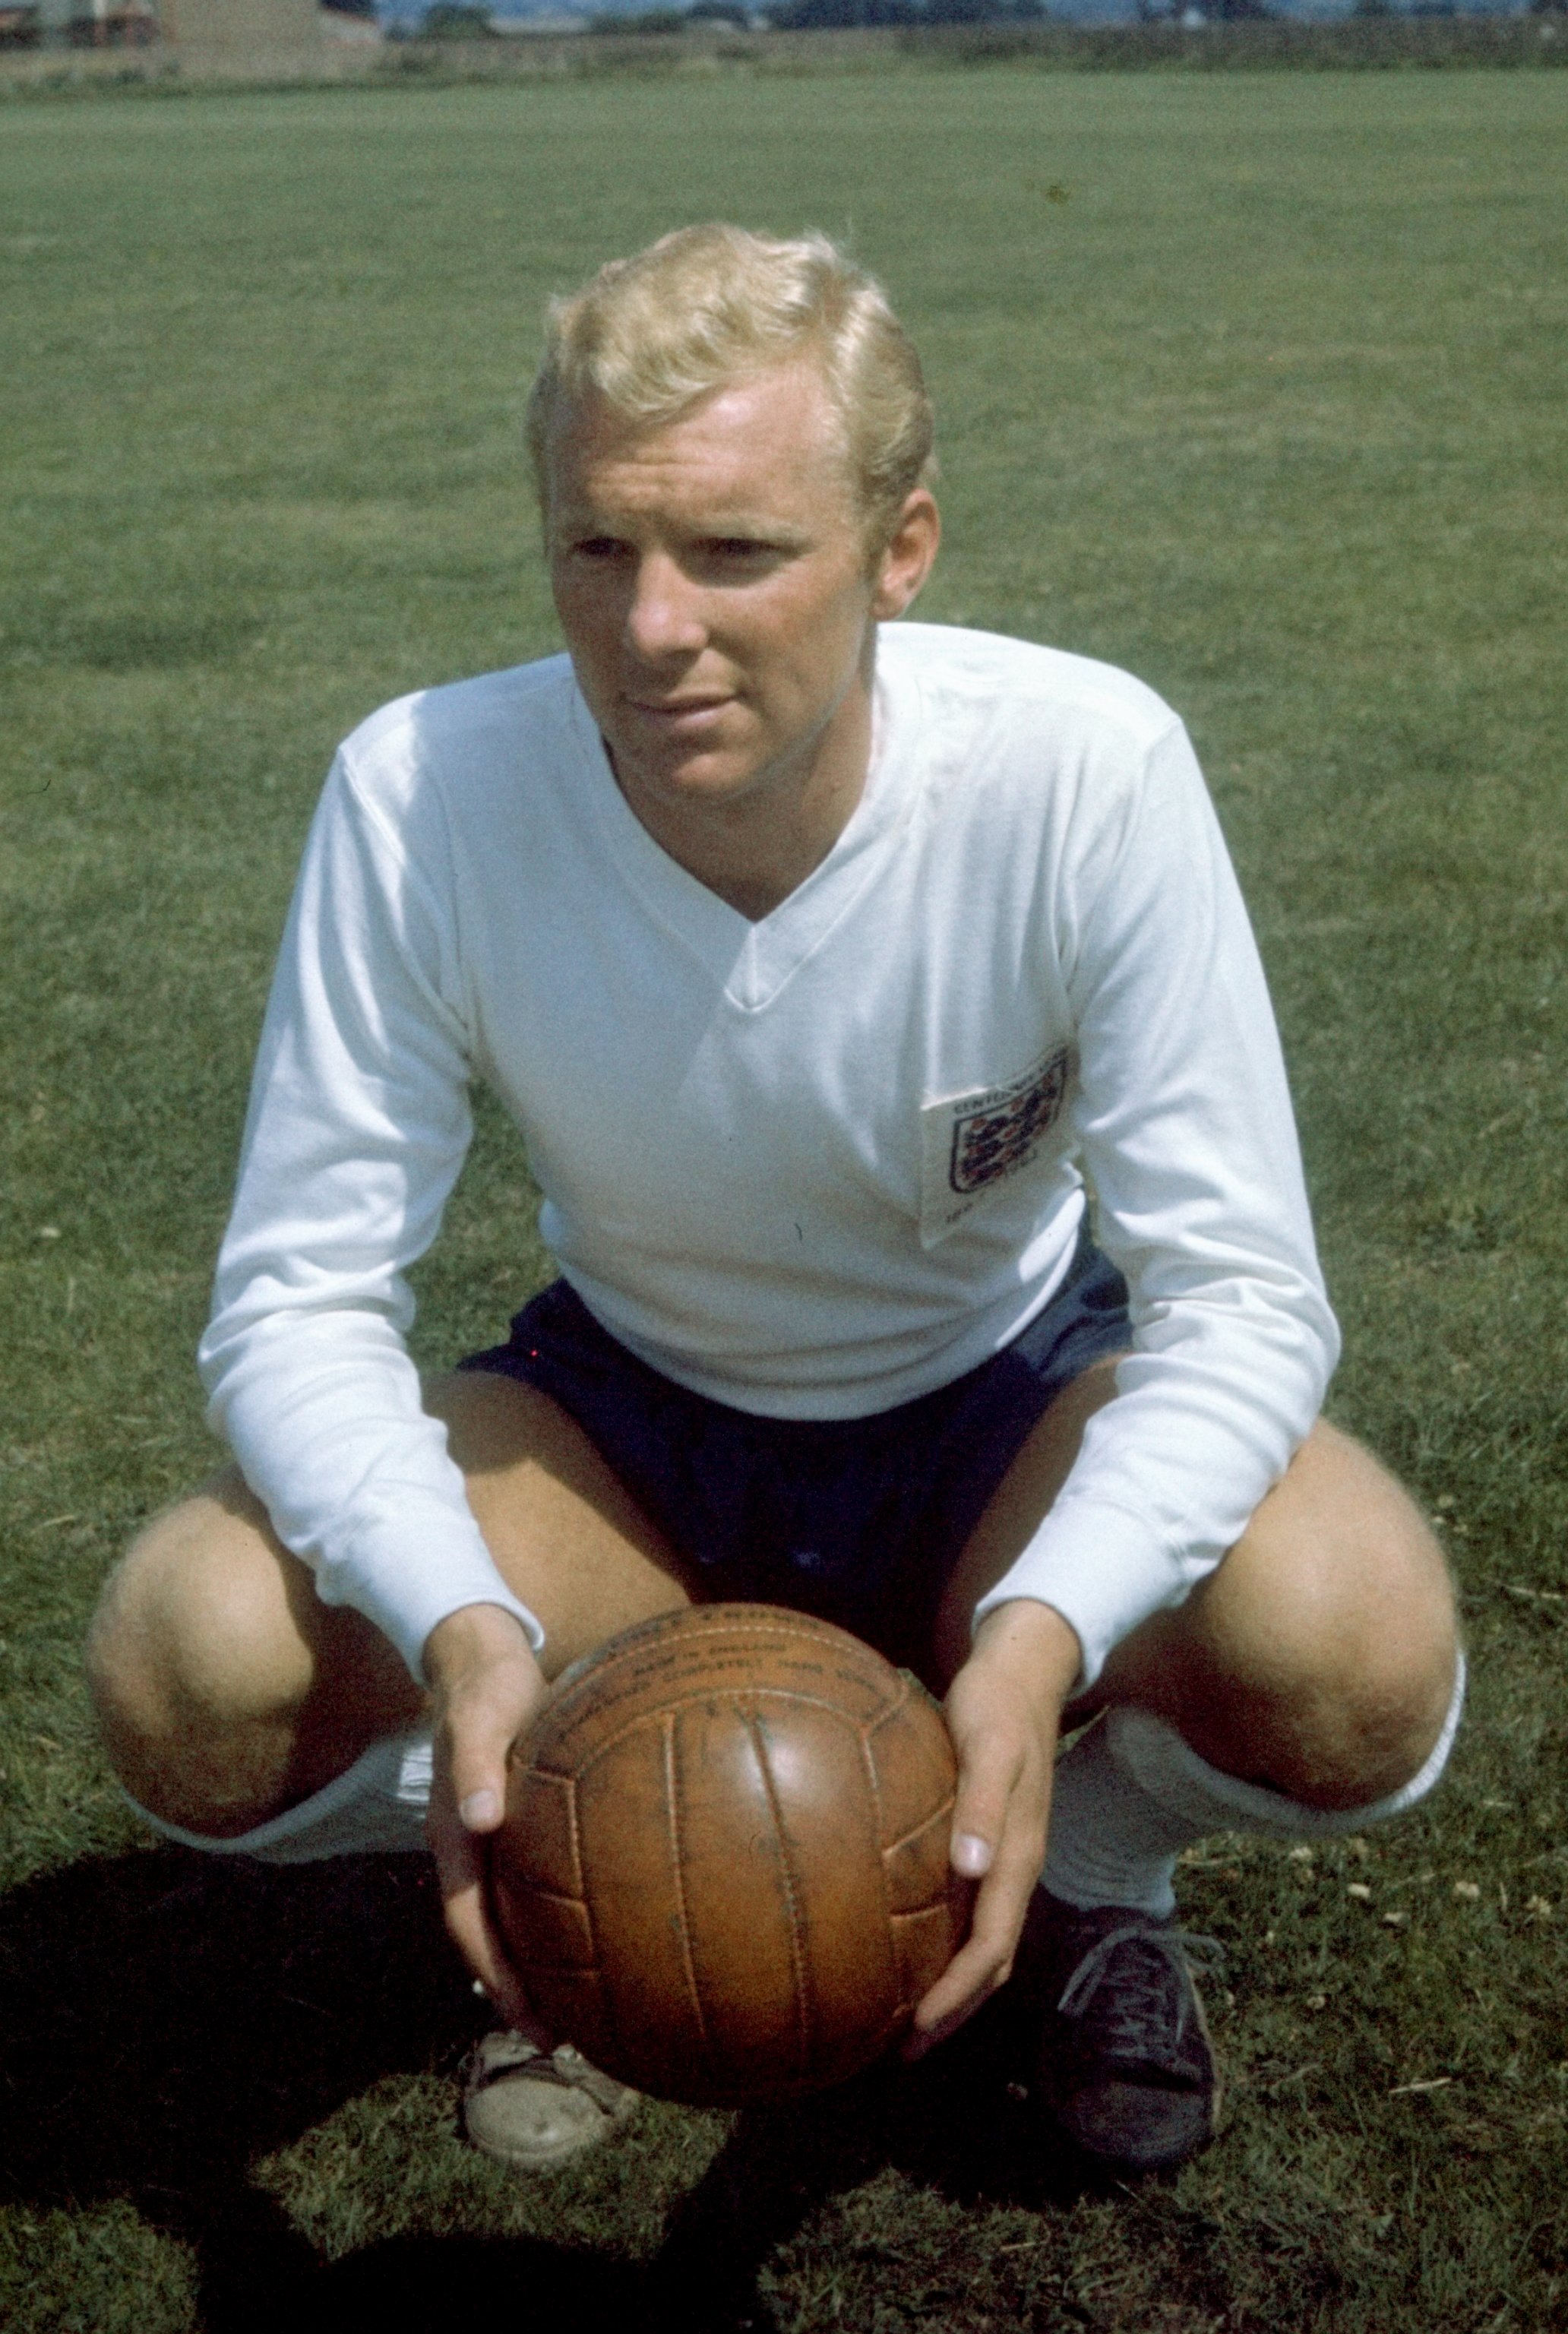 Undated:  Bobby Moore of England poses for a photograph during a training session. \ Mandatory Credit: Allsport UK /Allsport